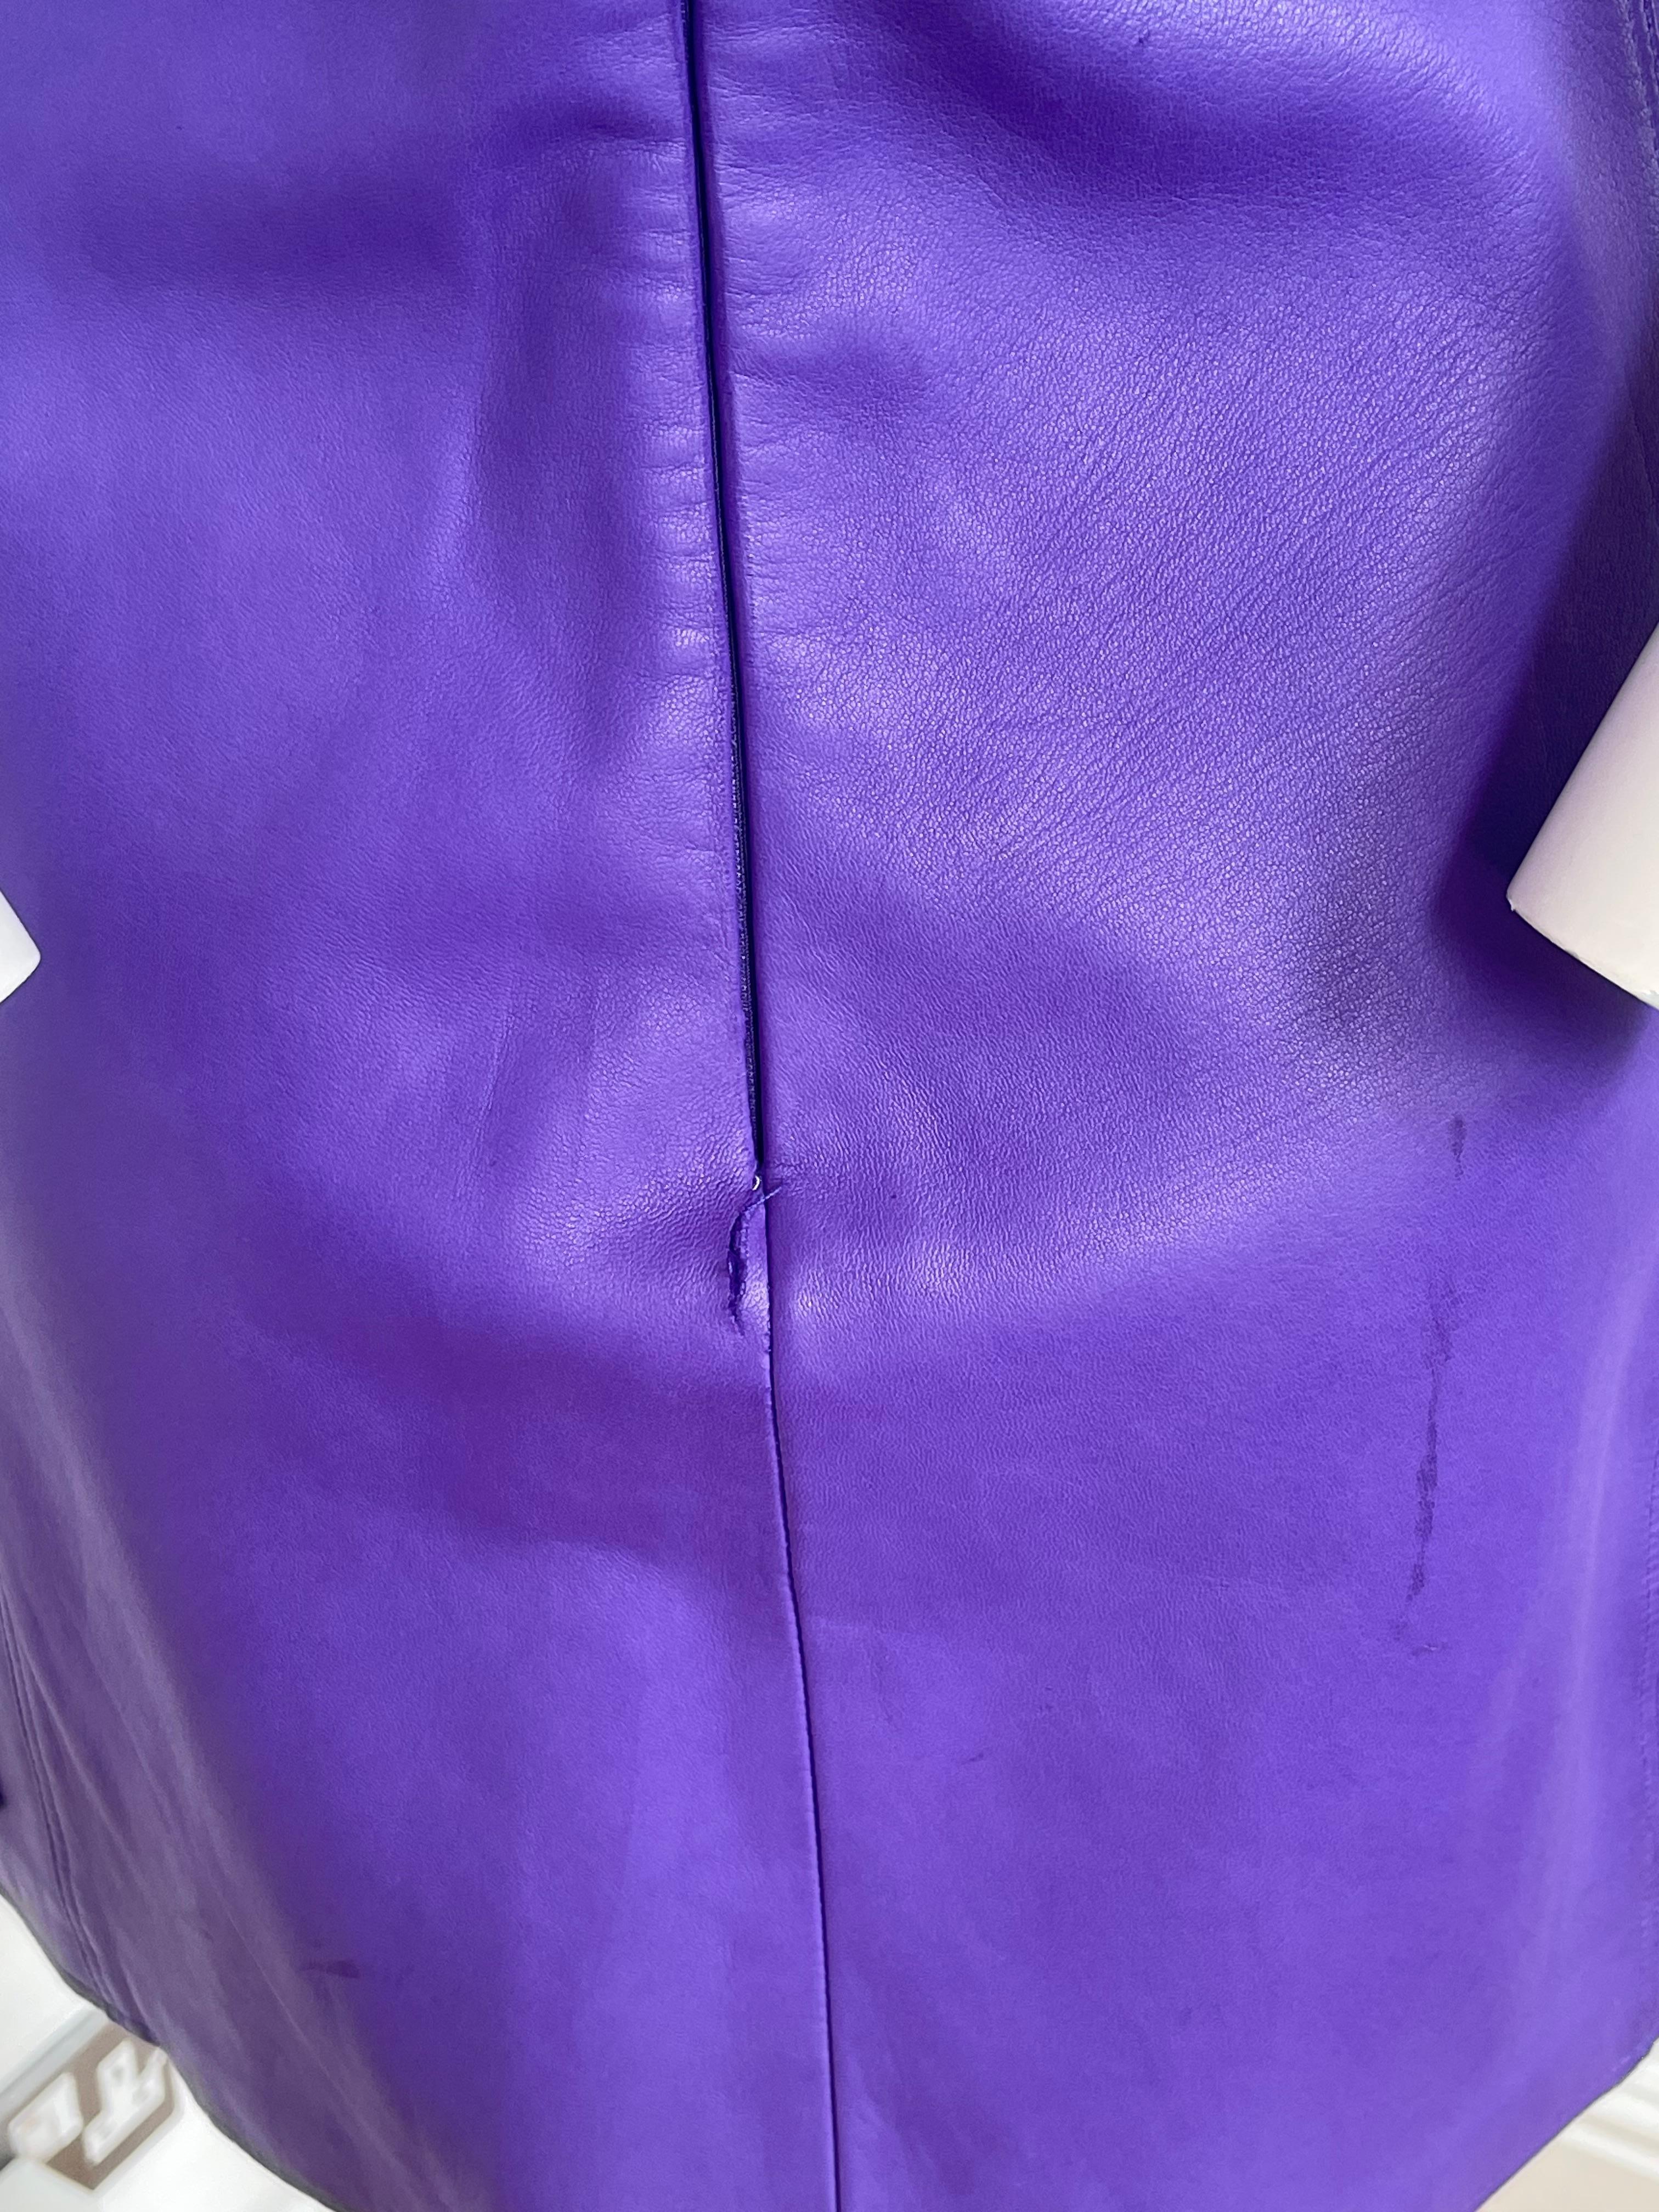 FW 1996 Versace purple leather shift dress with medusa buttons 4